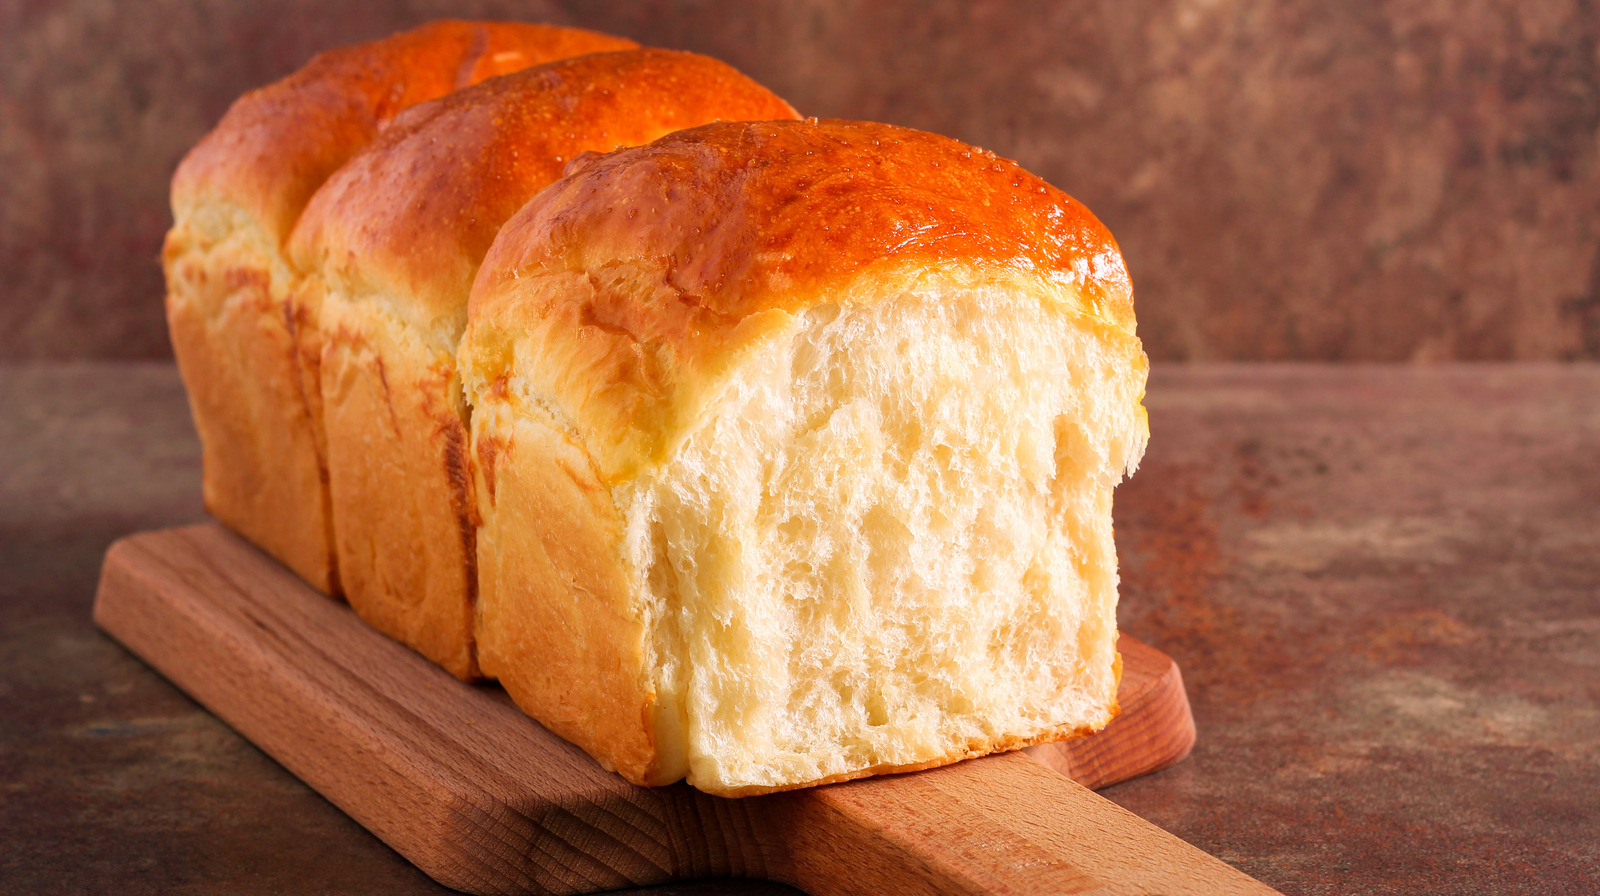 How Long Can You Store Bread On The Counter Before It Goes Stale? - Tasting Table